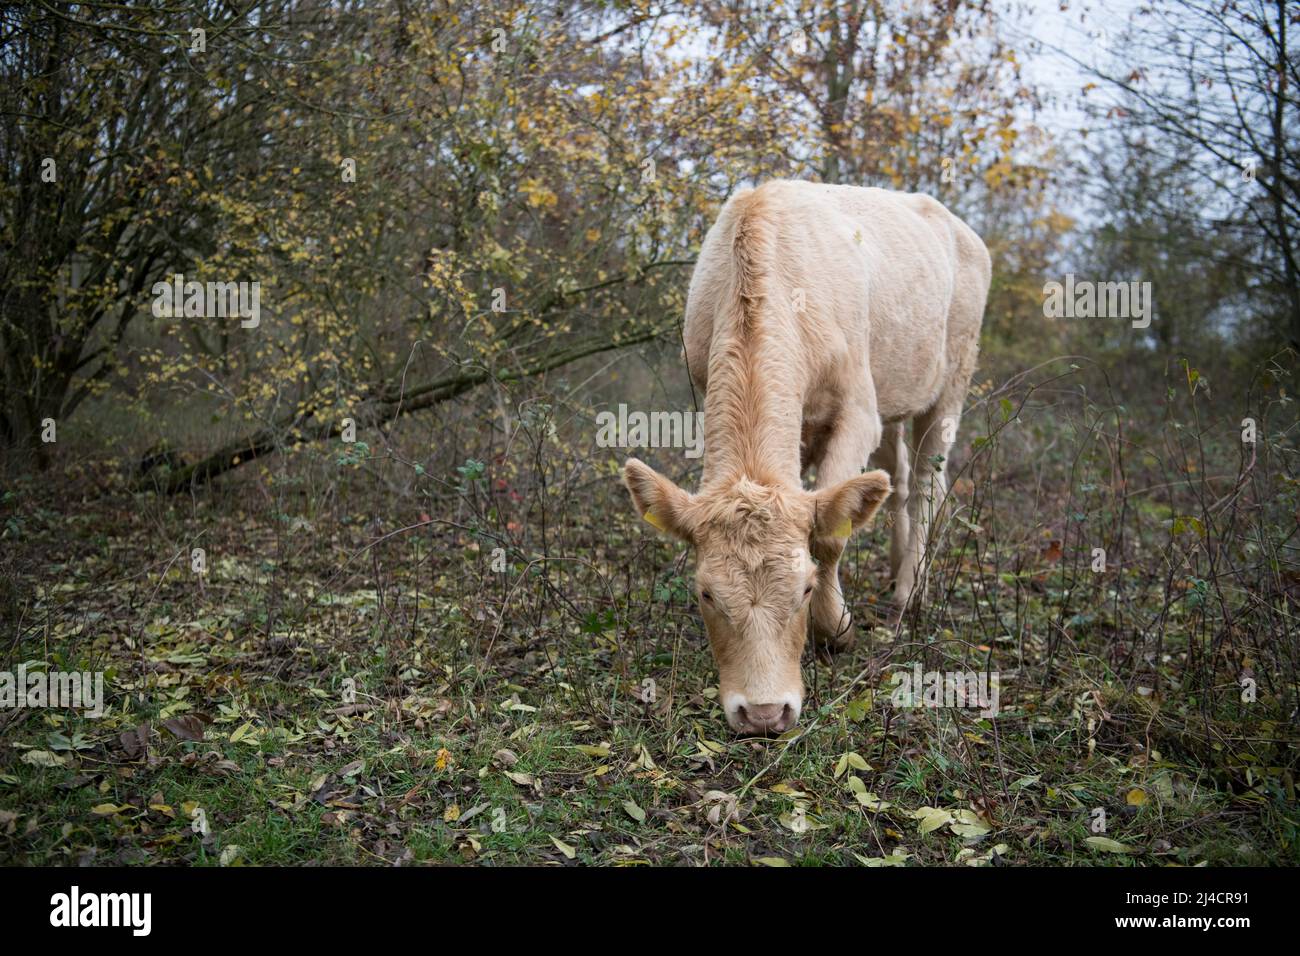 Domestic cattle (Bos taurus), cattle in extensive farming as landscape maintainers in the nature reserve in free-range husbandry, Bislicher Insel Stock Photo